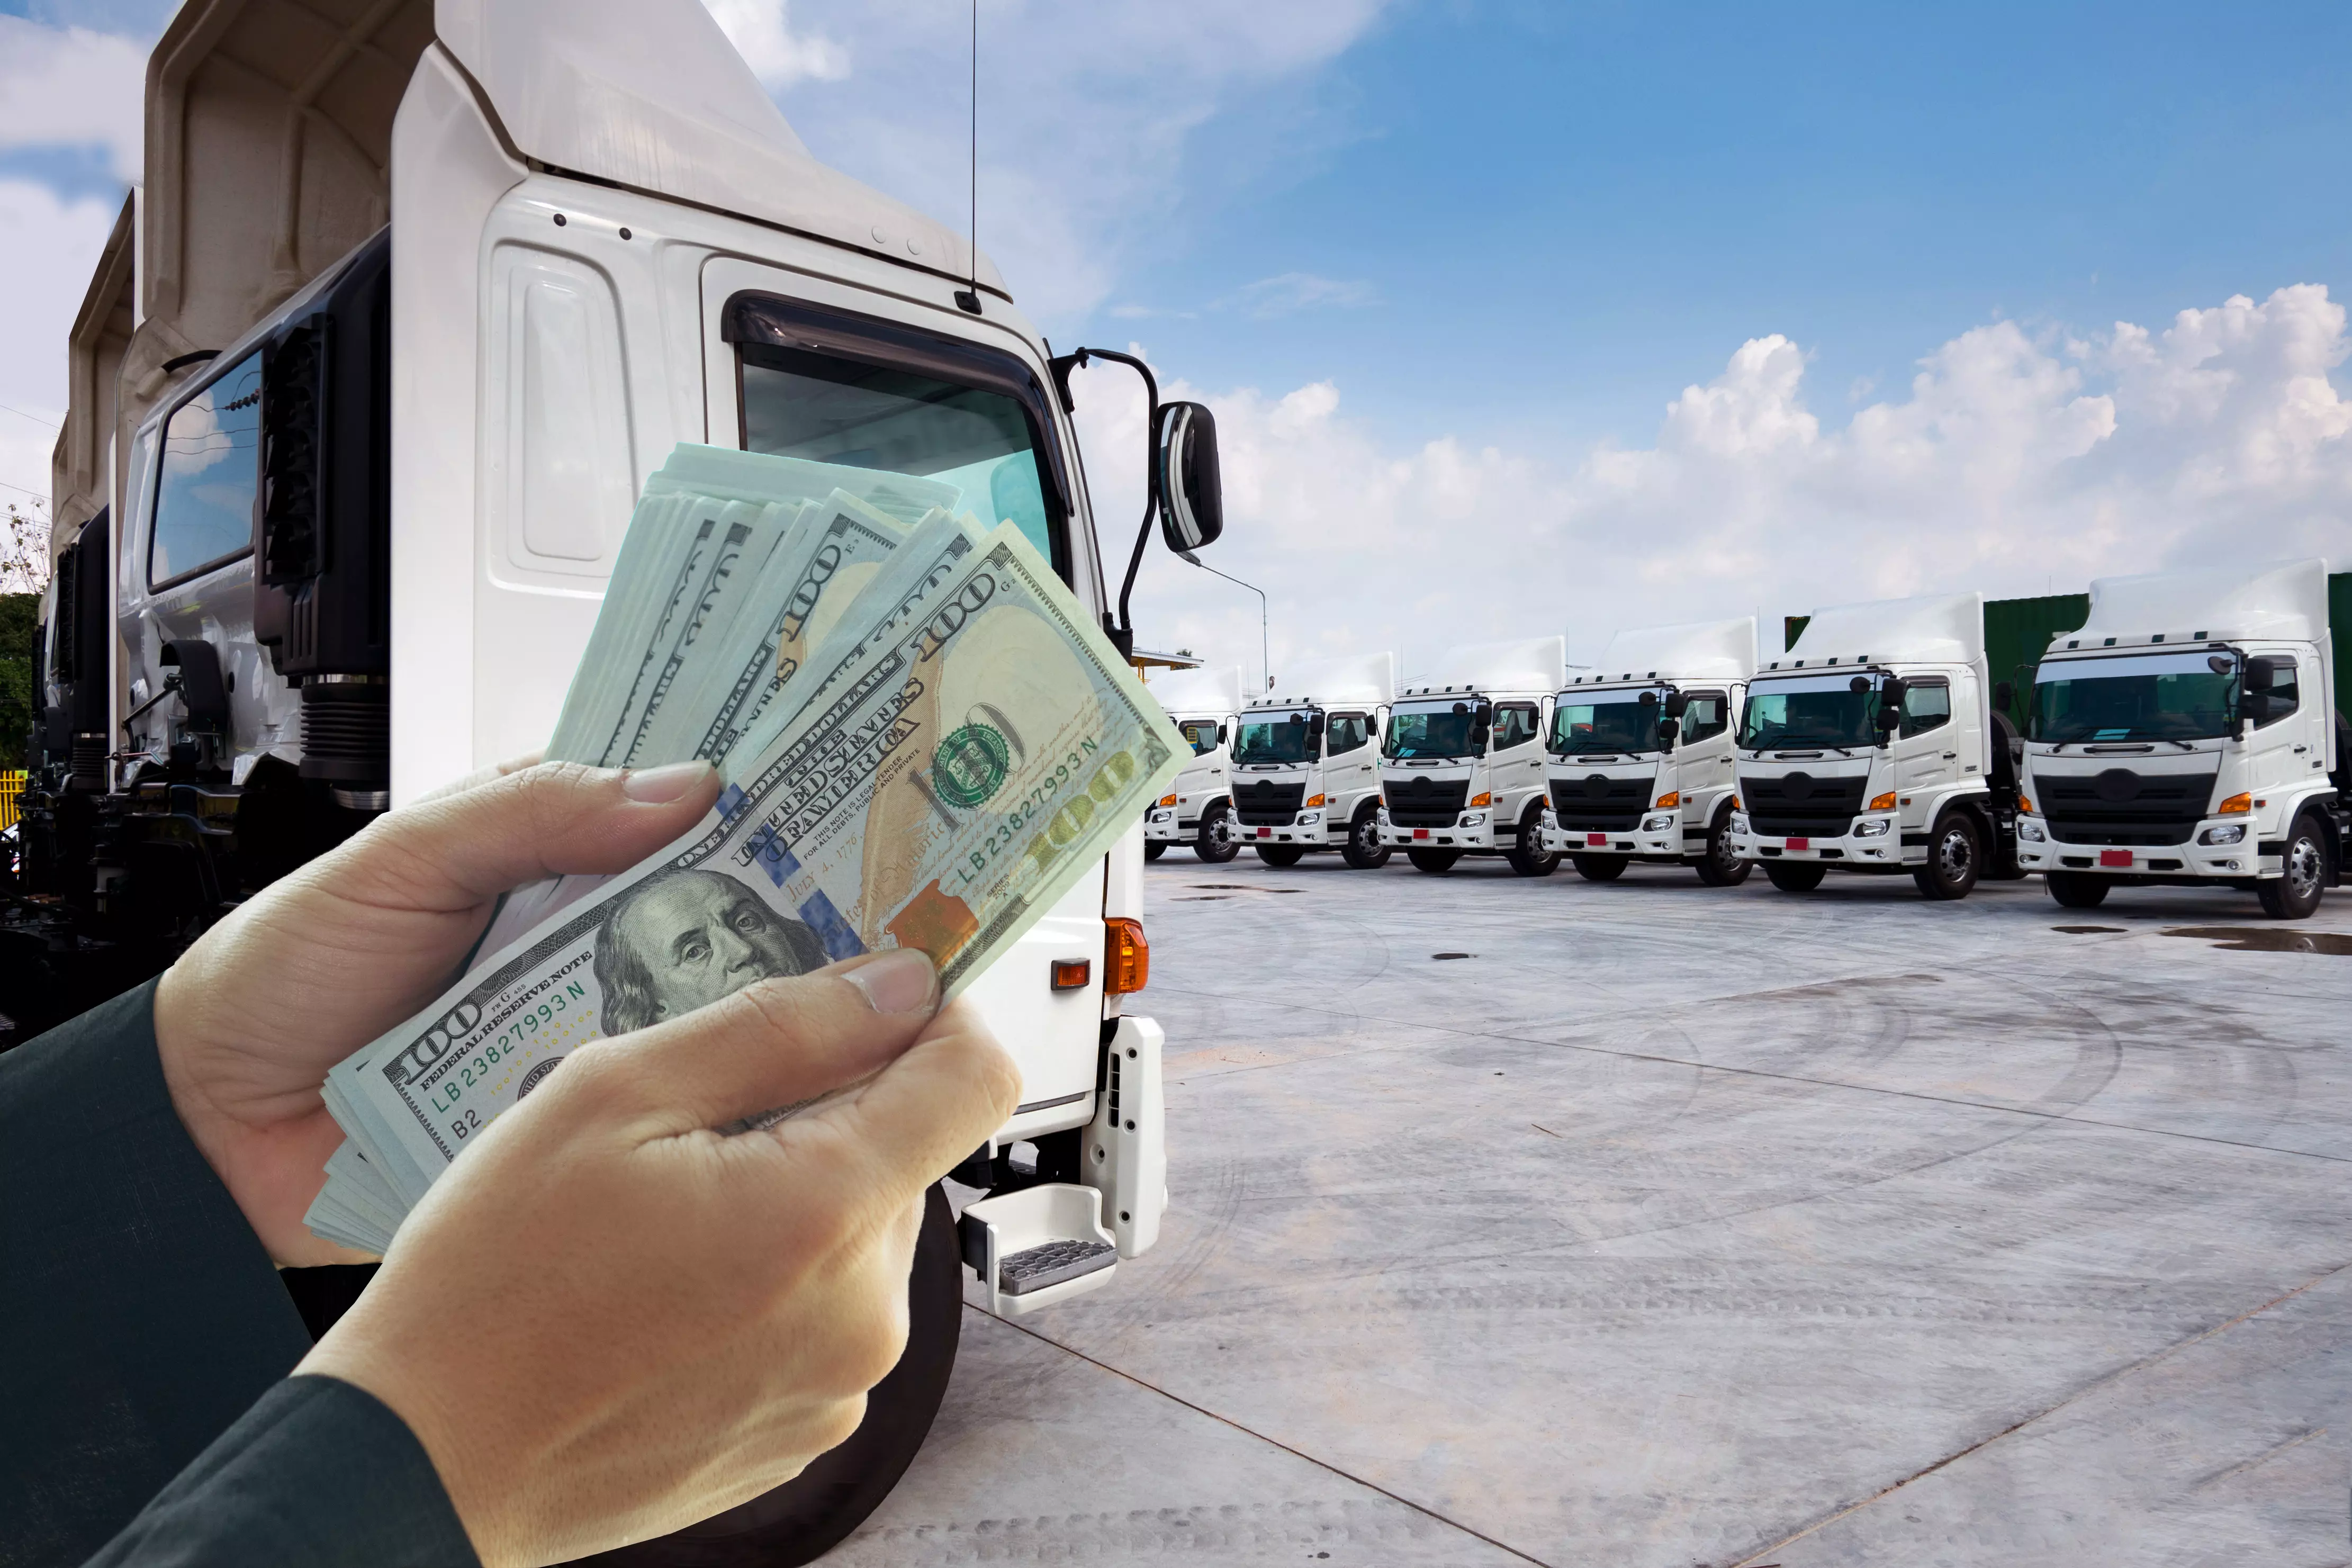 Counting money in front of trucks